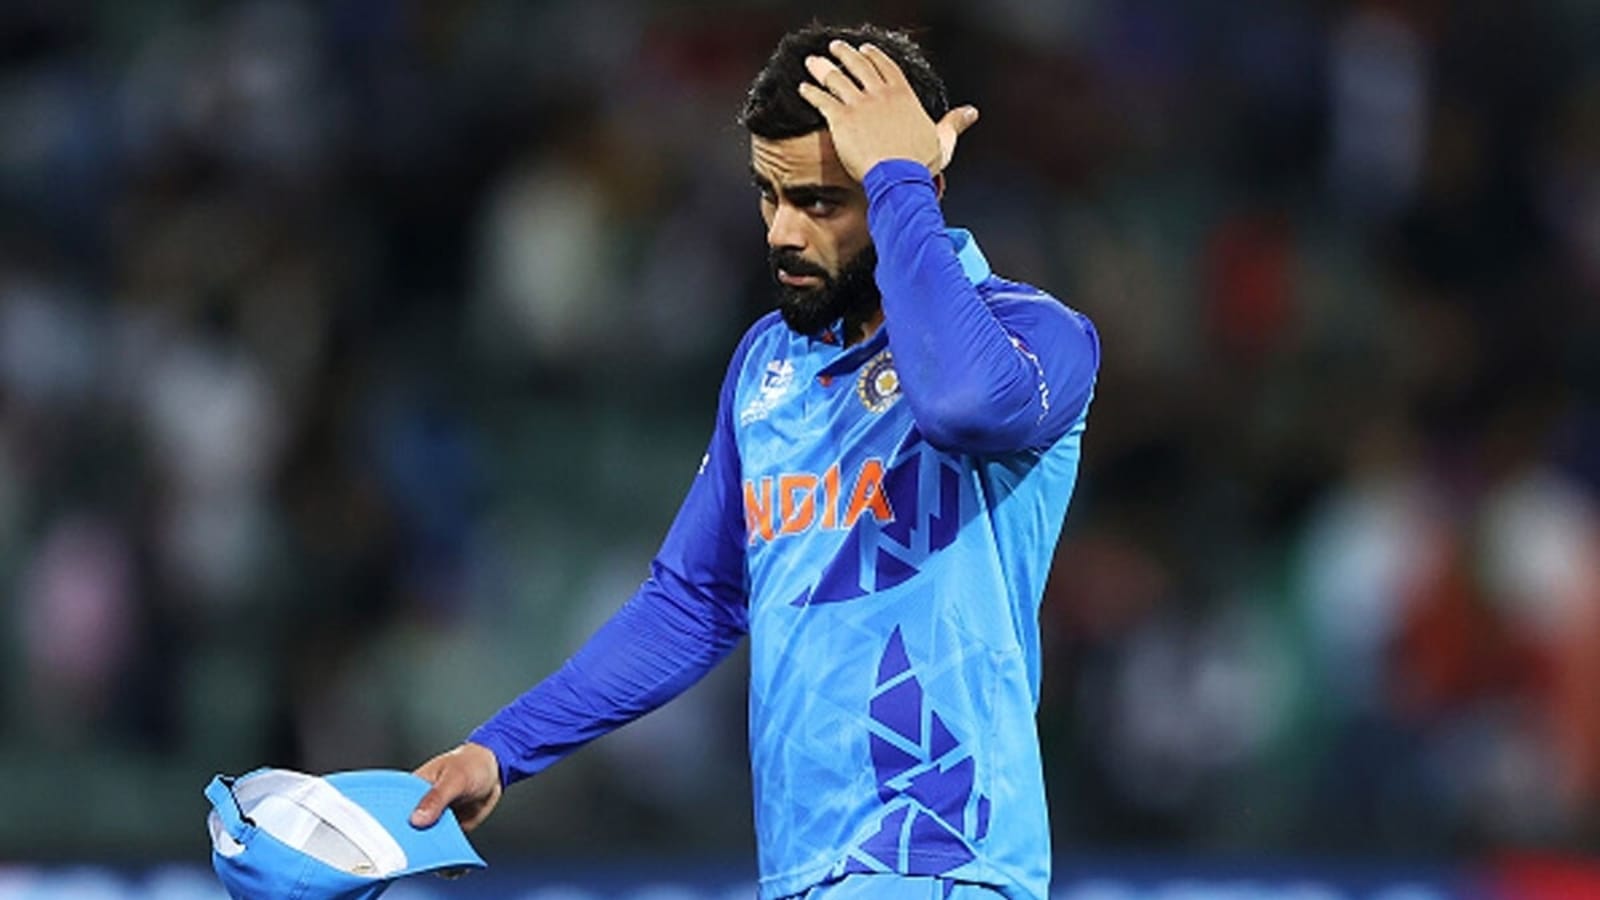 Short of achieving our dream, disappointment in hearts': Kohli ...